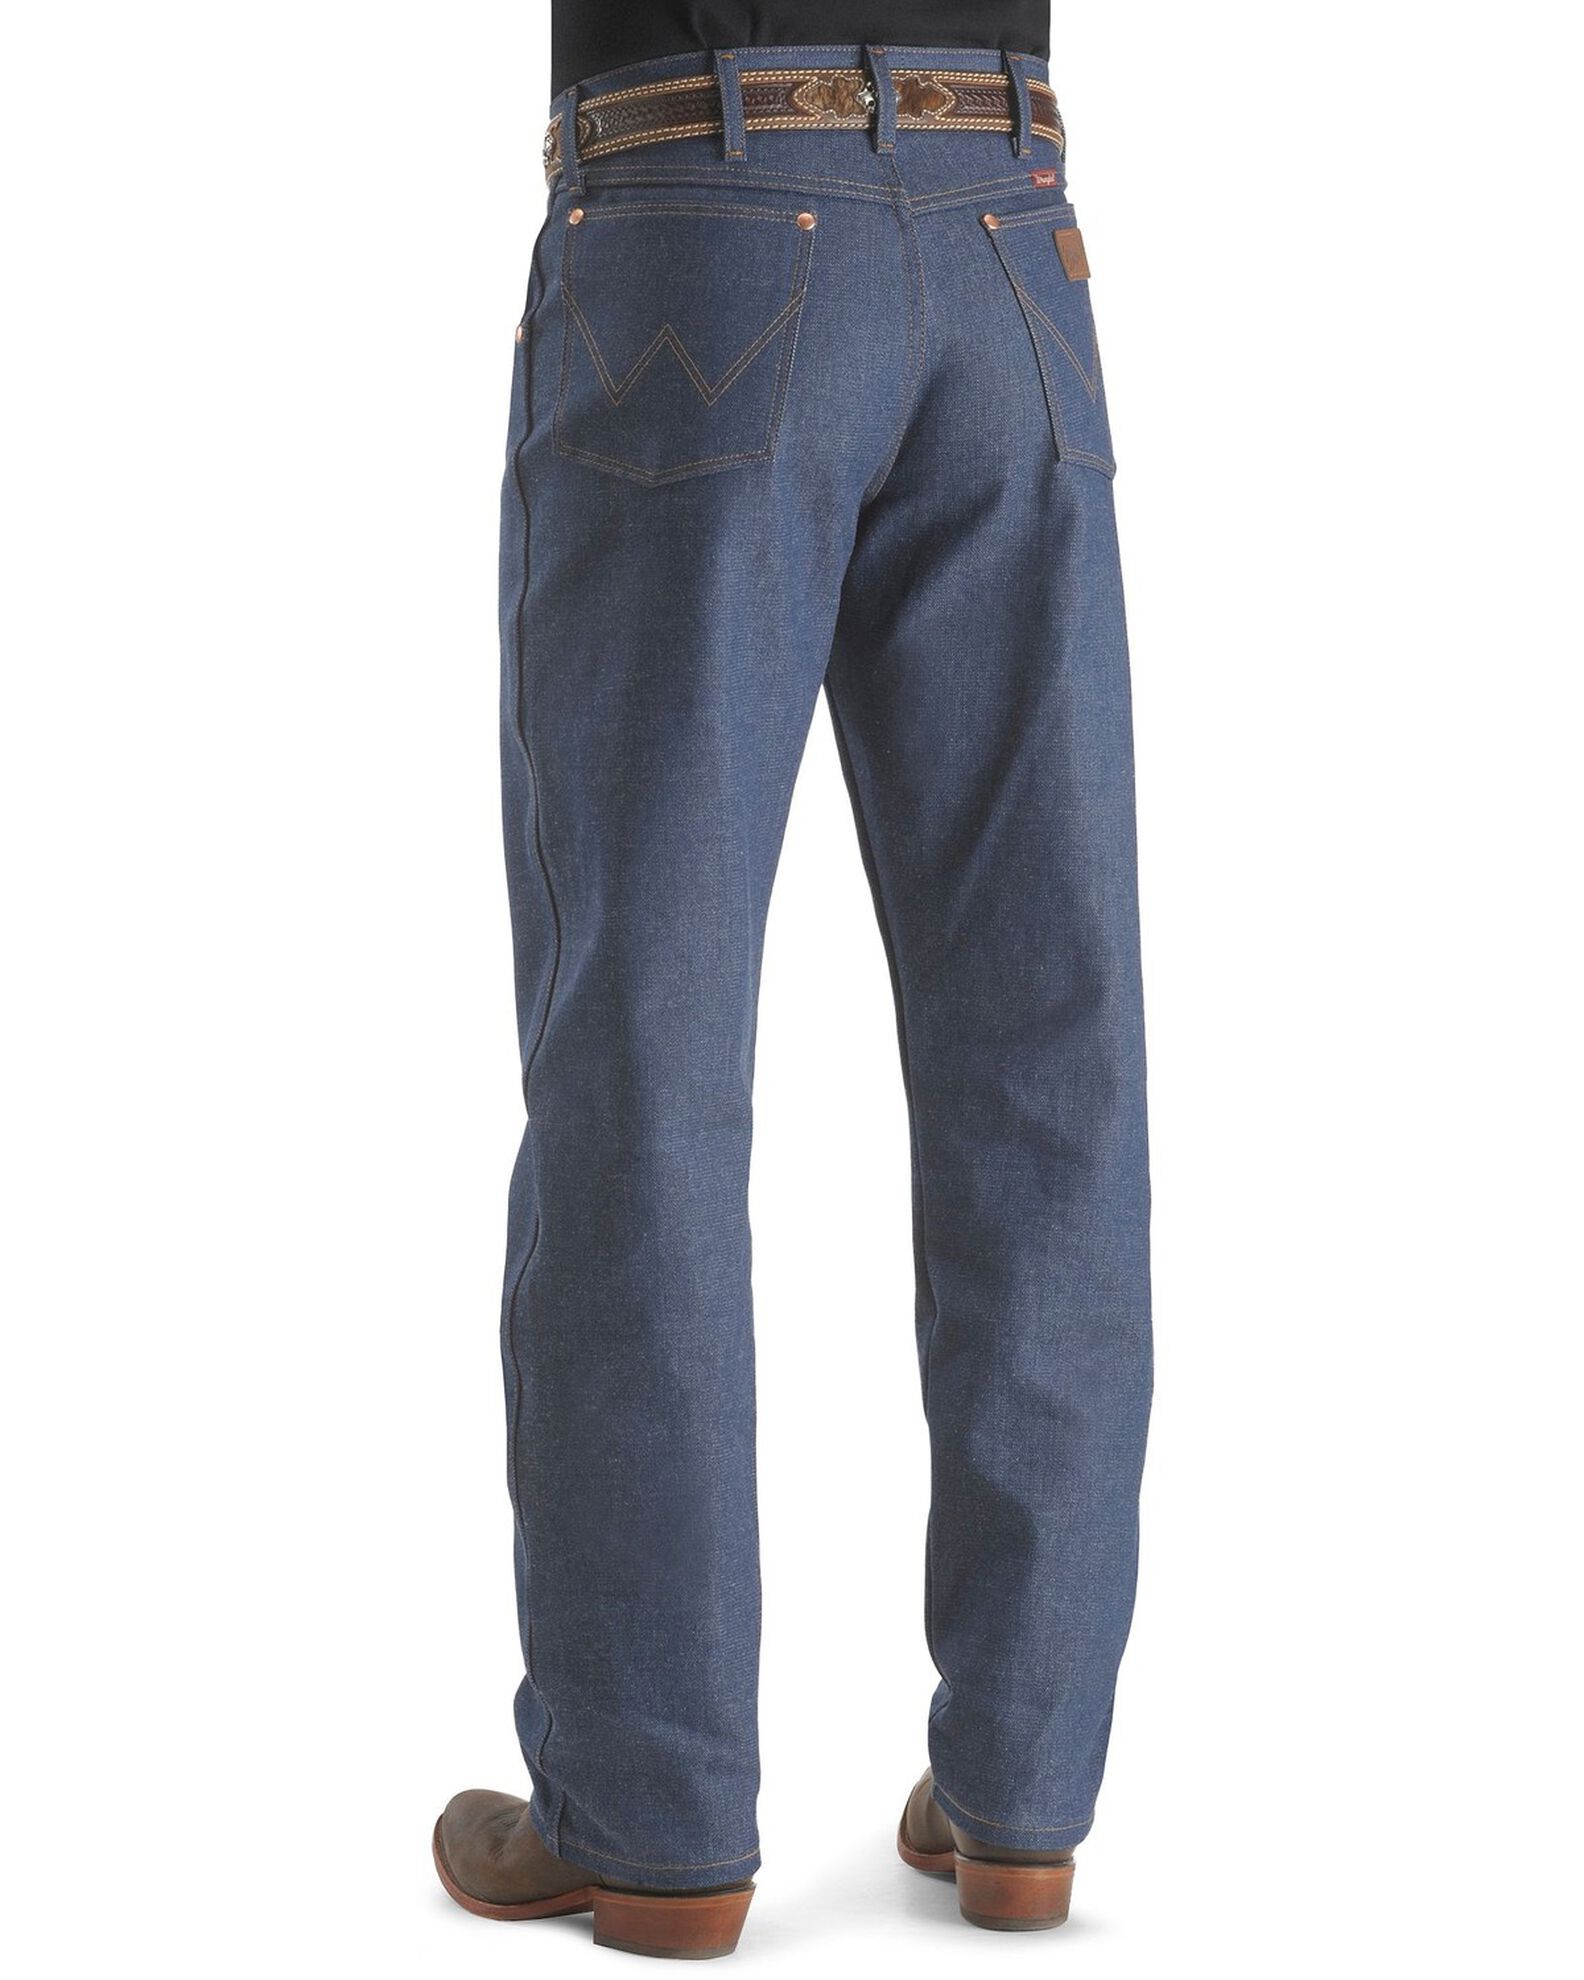 Wrangler 31MWZ Cowboy Cut Rigid Relaxed Fit Jeans | Sheplers